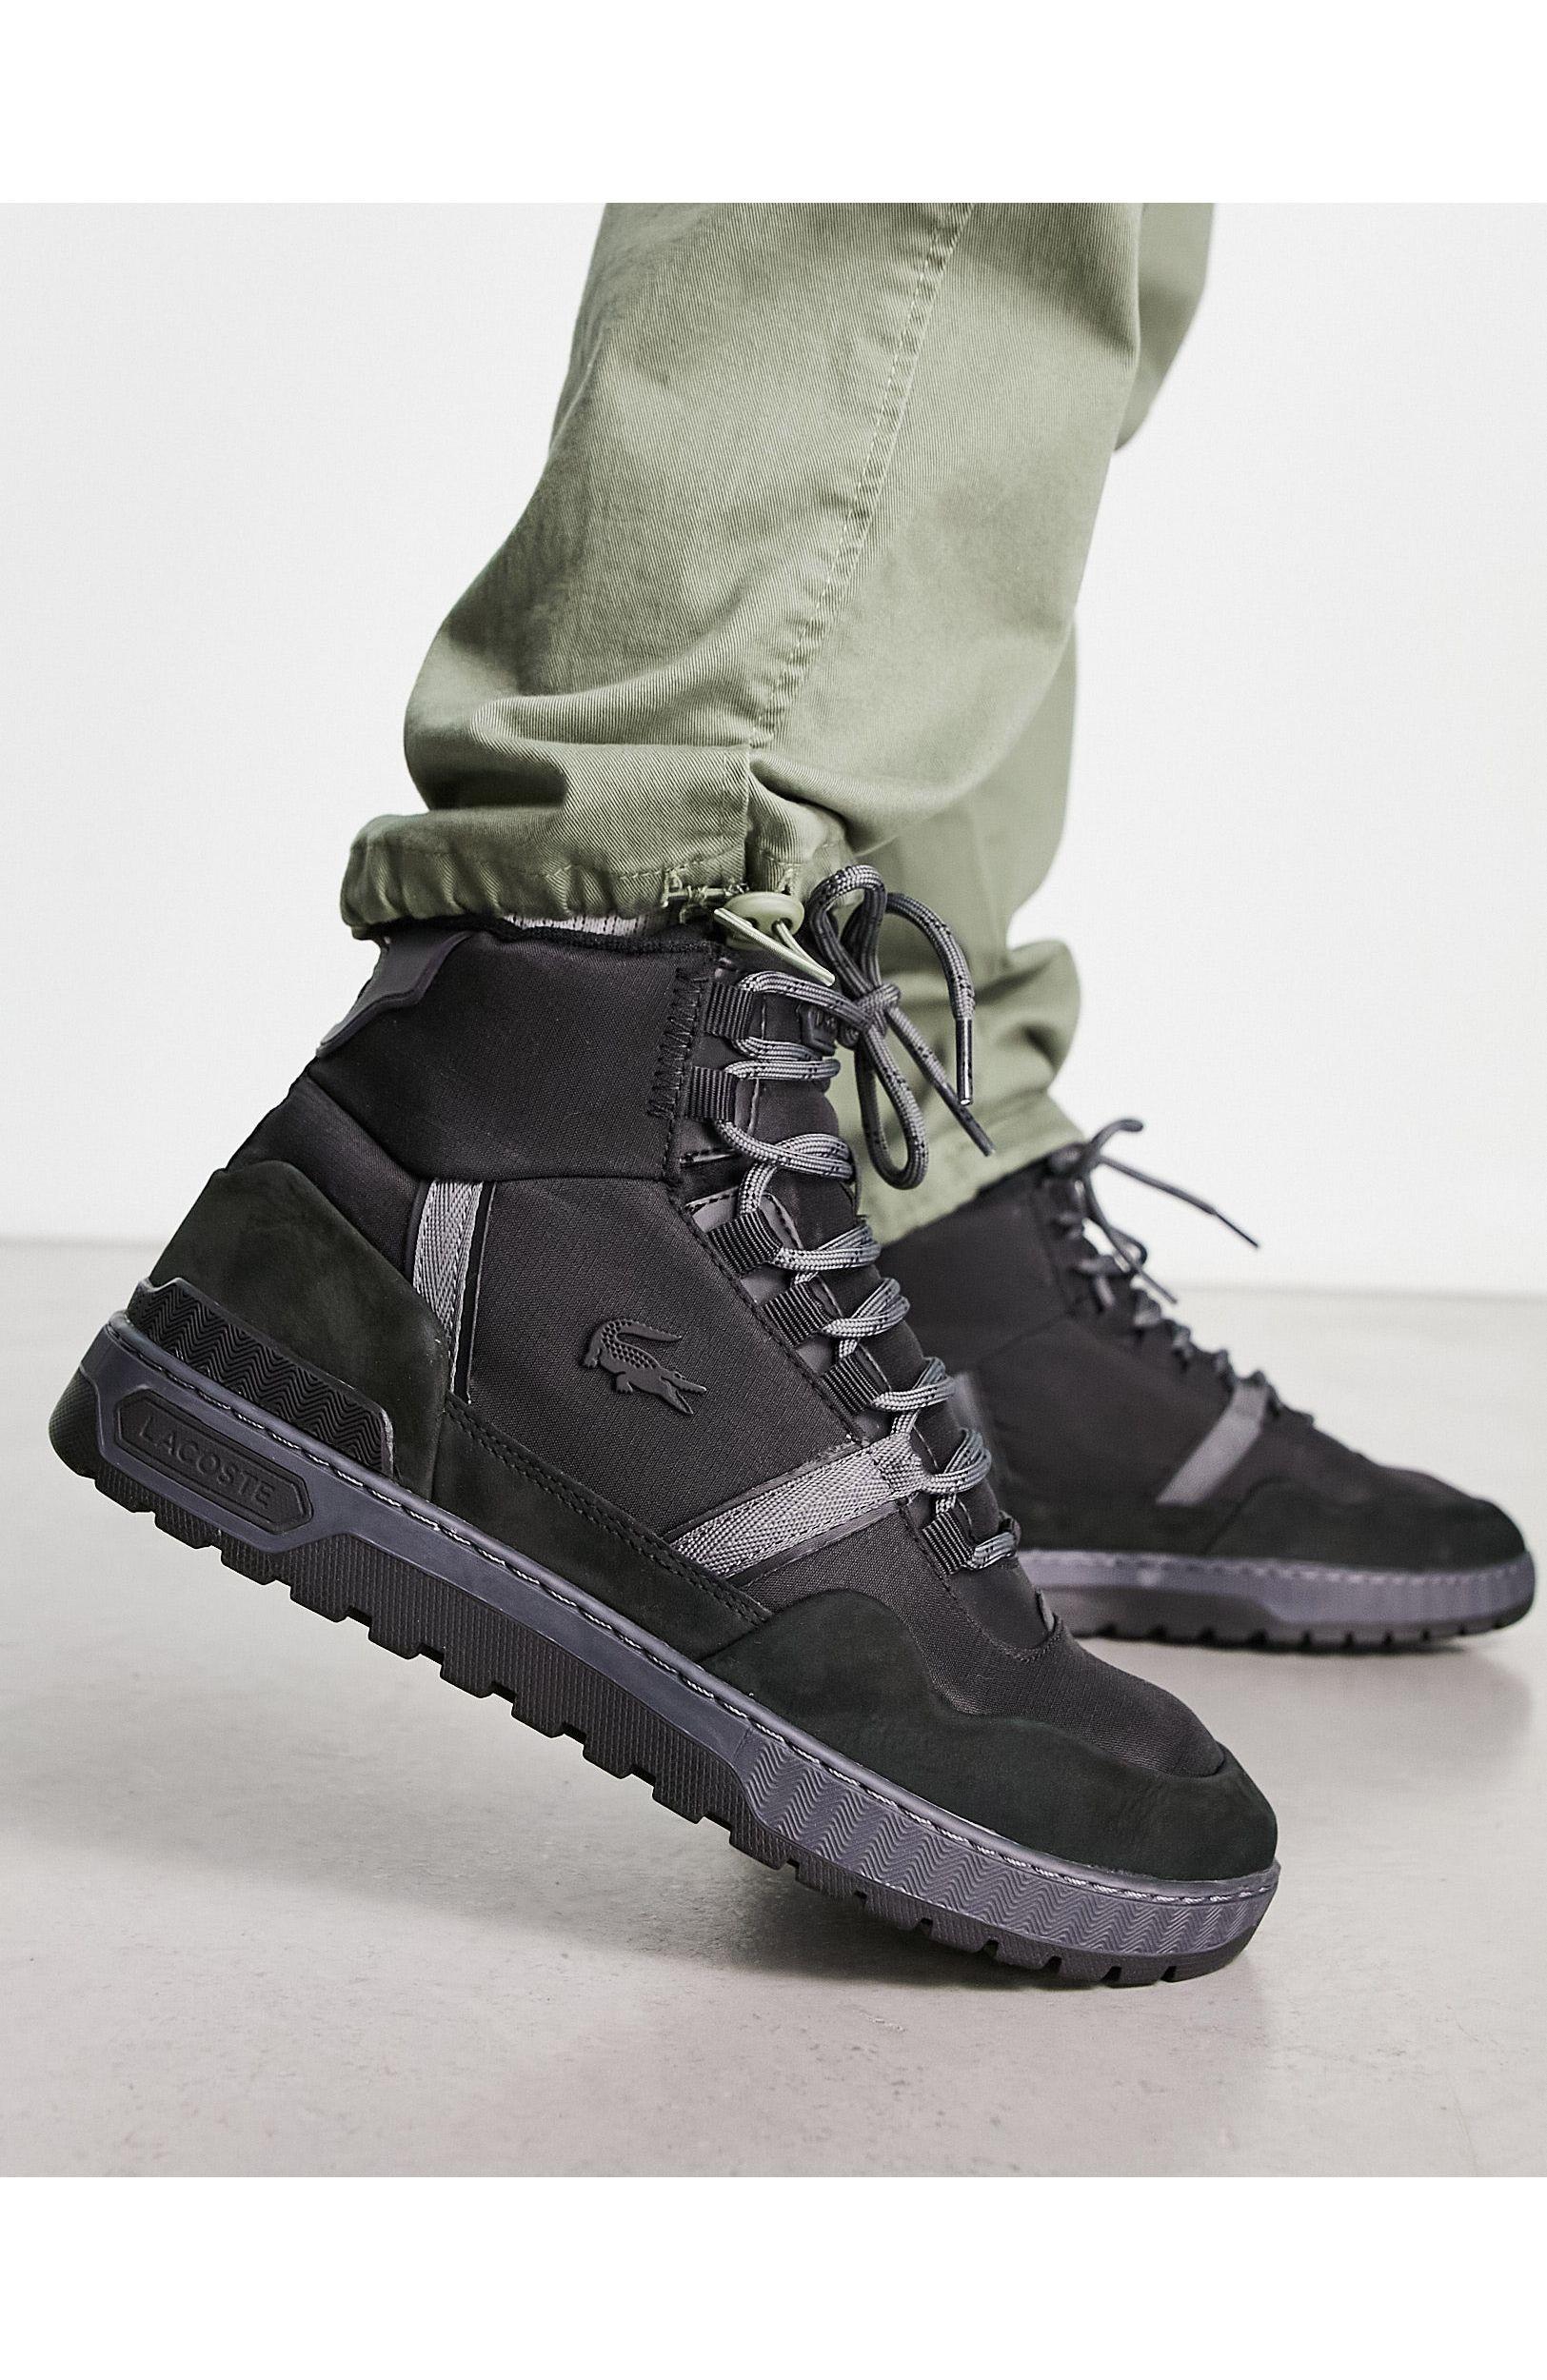 Lacoste T-clip Winter Mid Boots in Metallic for Men | Lyst